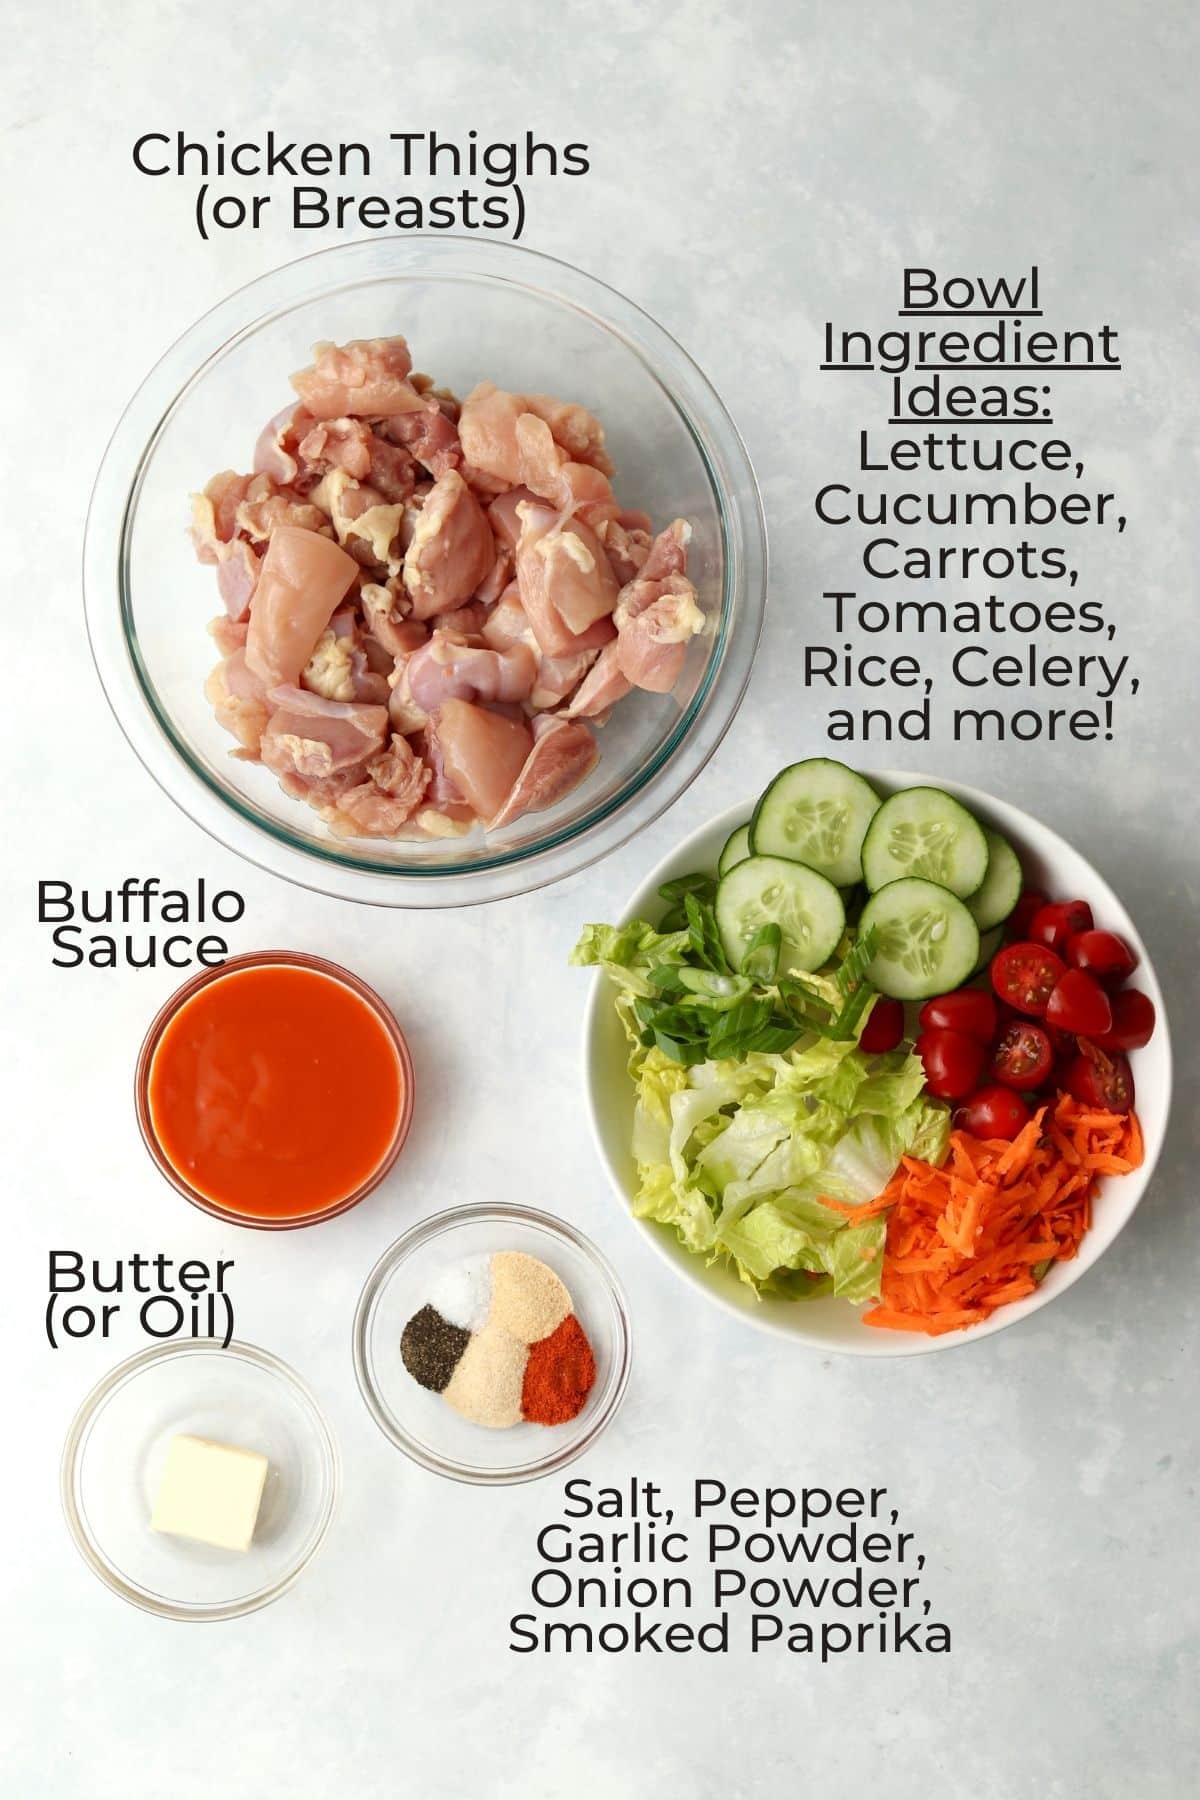 chicken thighs, buffalo sauce, butter, spices, and bowl ingredients